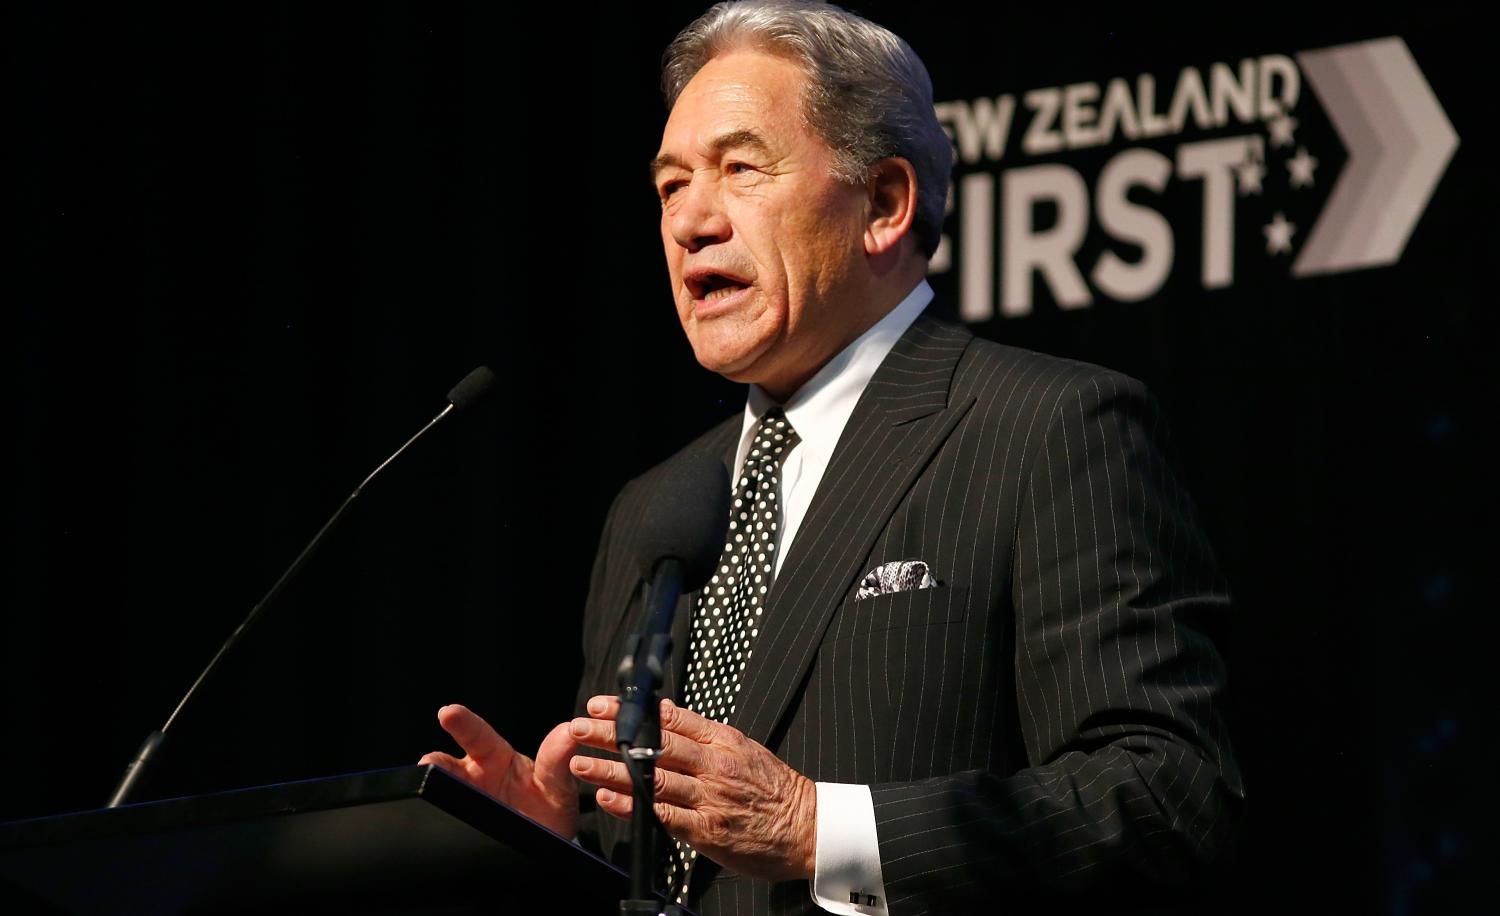 New Zealand election: Another victory salute from Winston?